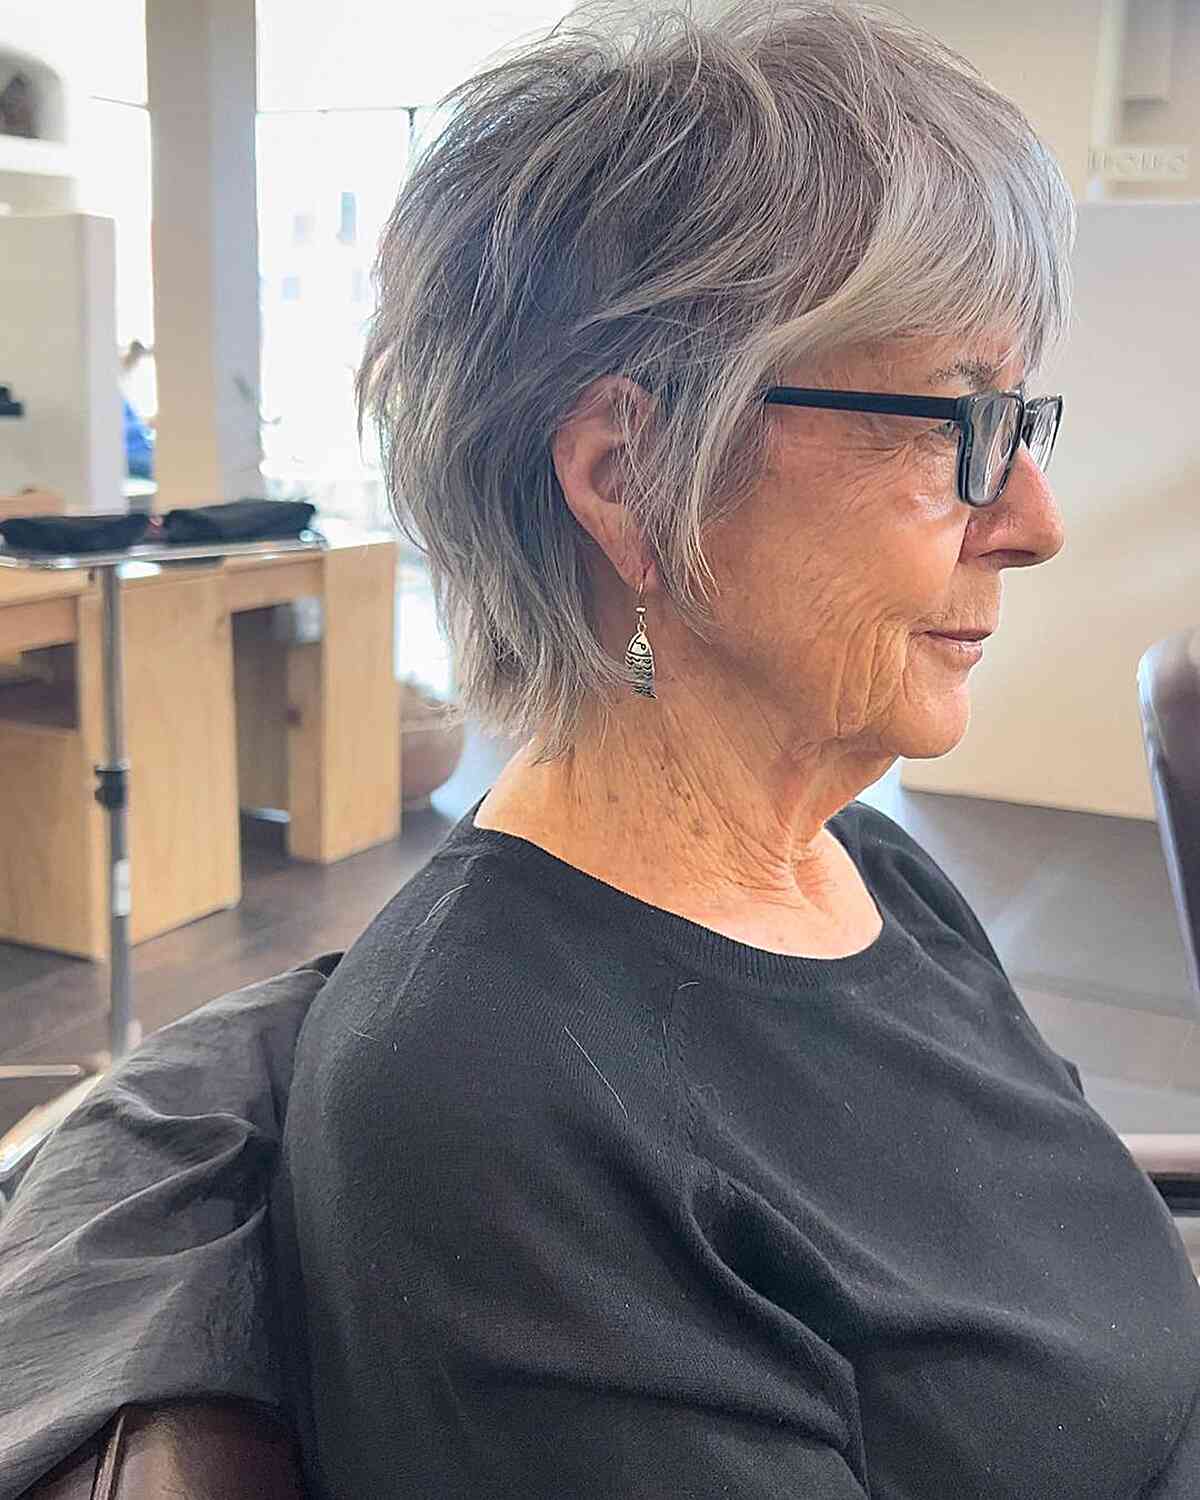 Pixie-Length Thin Hair with Shaggy Wispy Layers for Ladies Aged 70 with Glasses